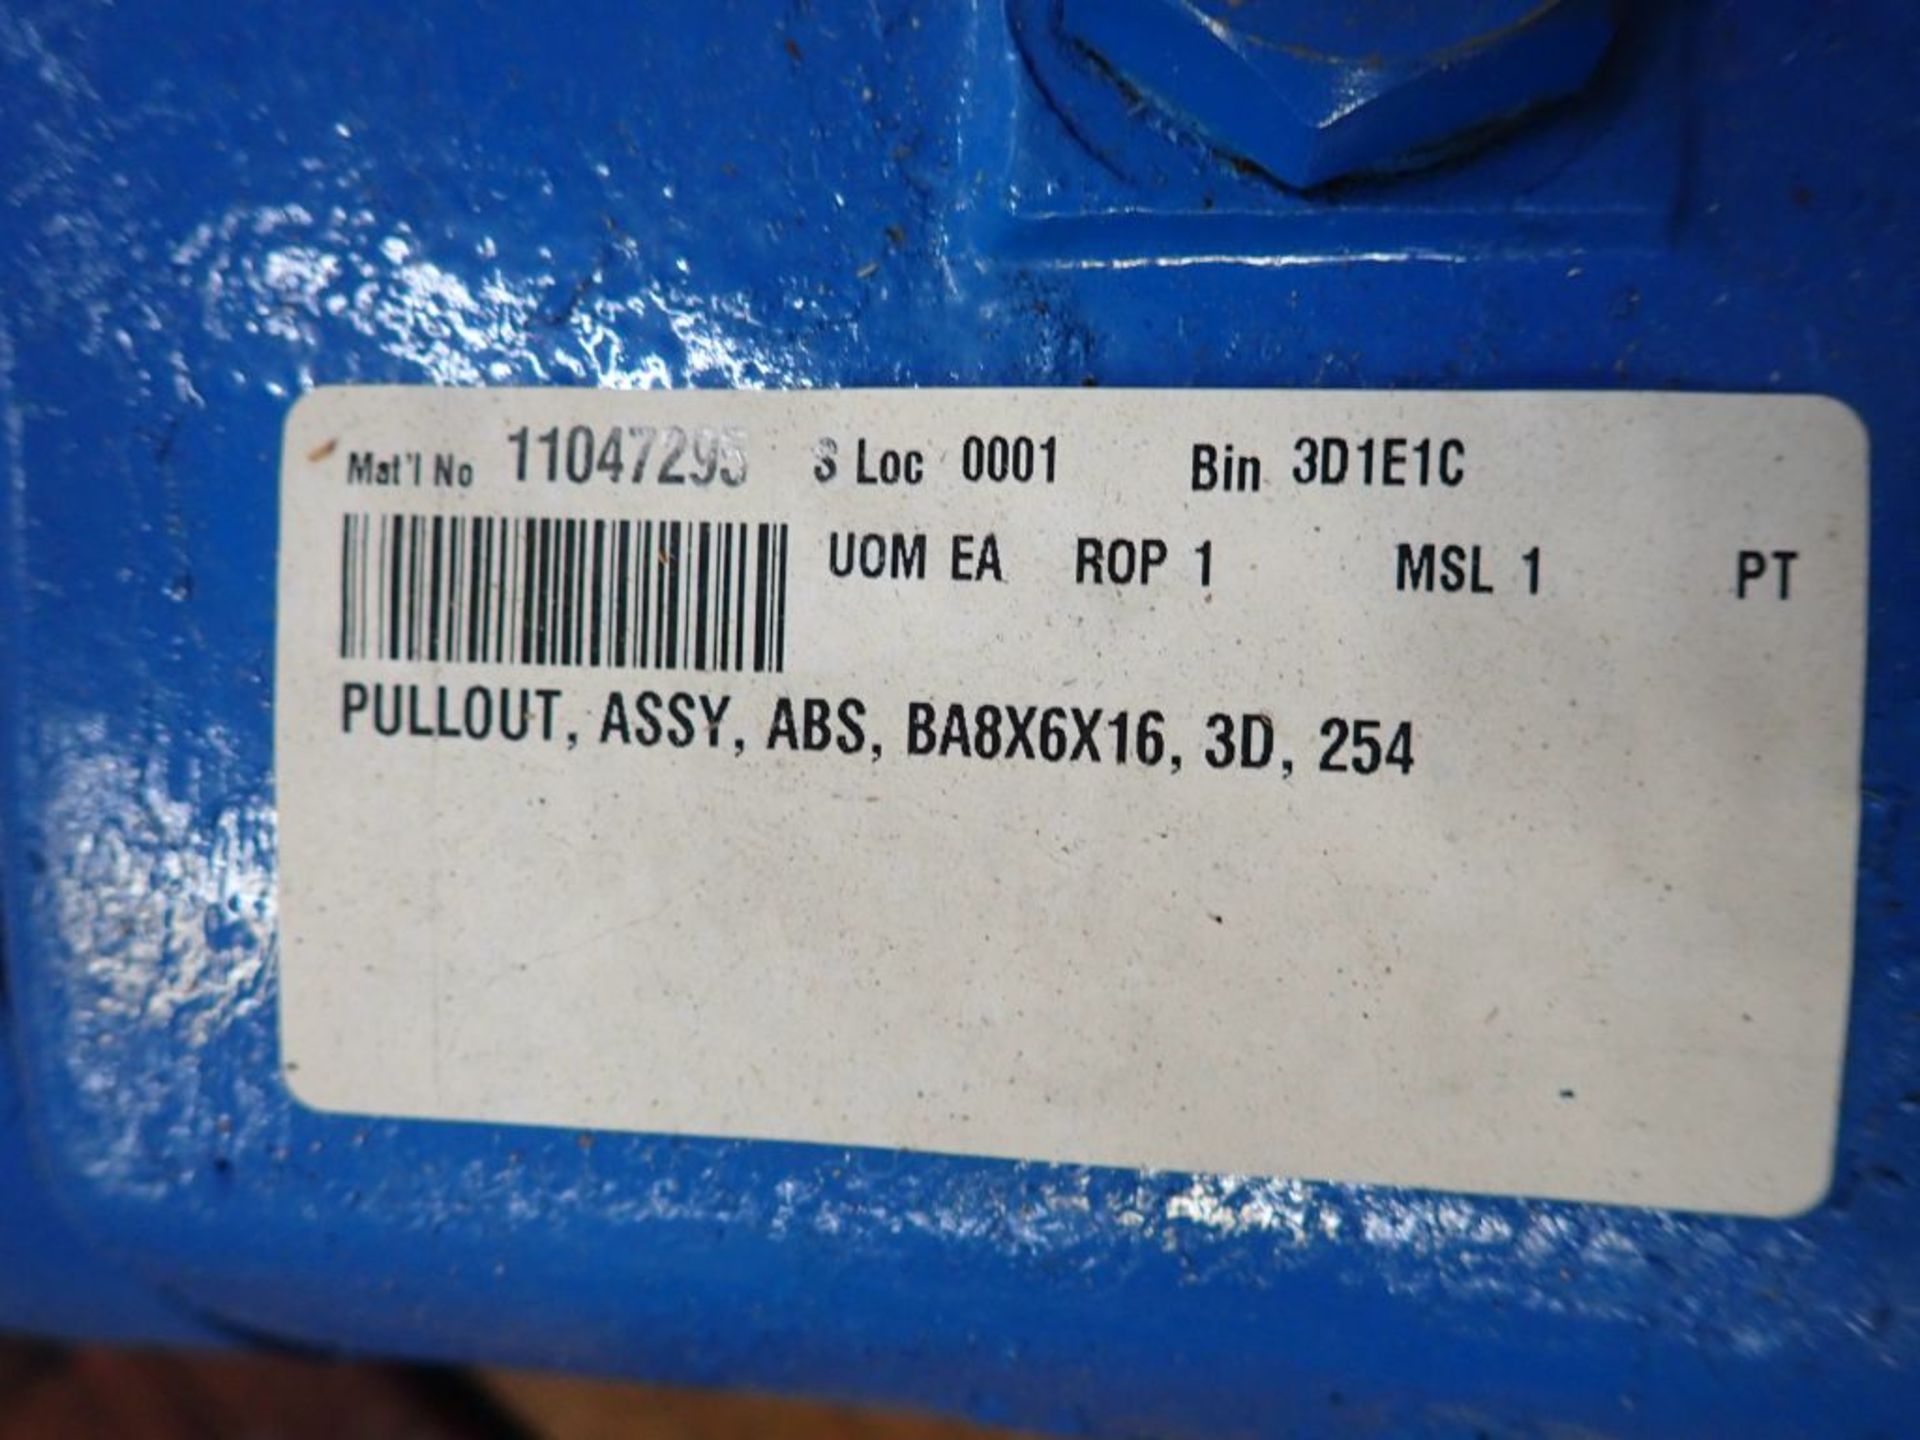 ABS Pullout Pump Subassembly - Part No. 254; 8 x 6 x 16; Tag: 215992 - Image 6 of 7